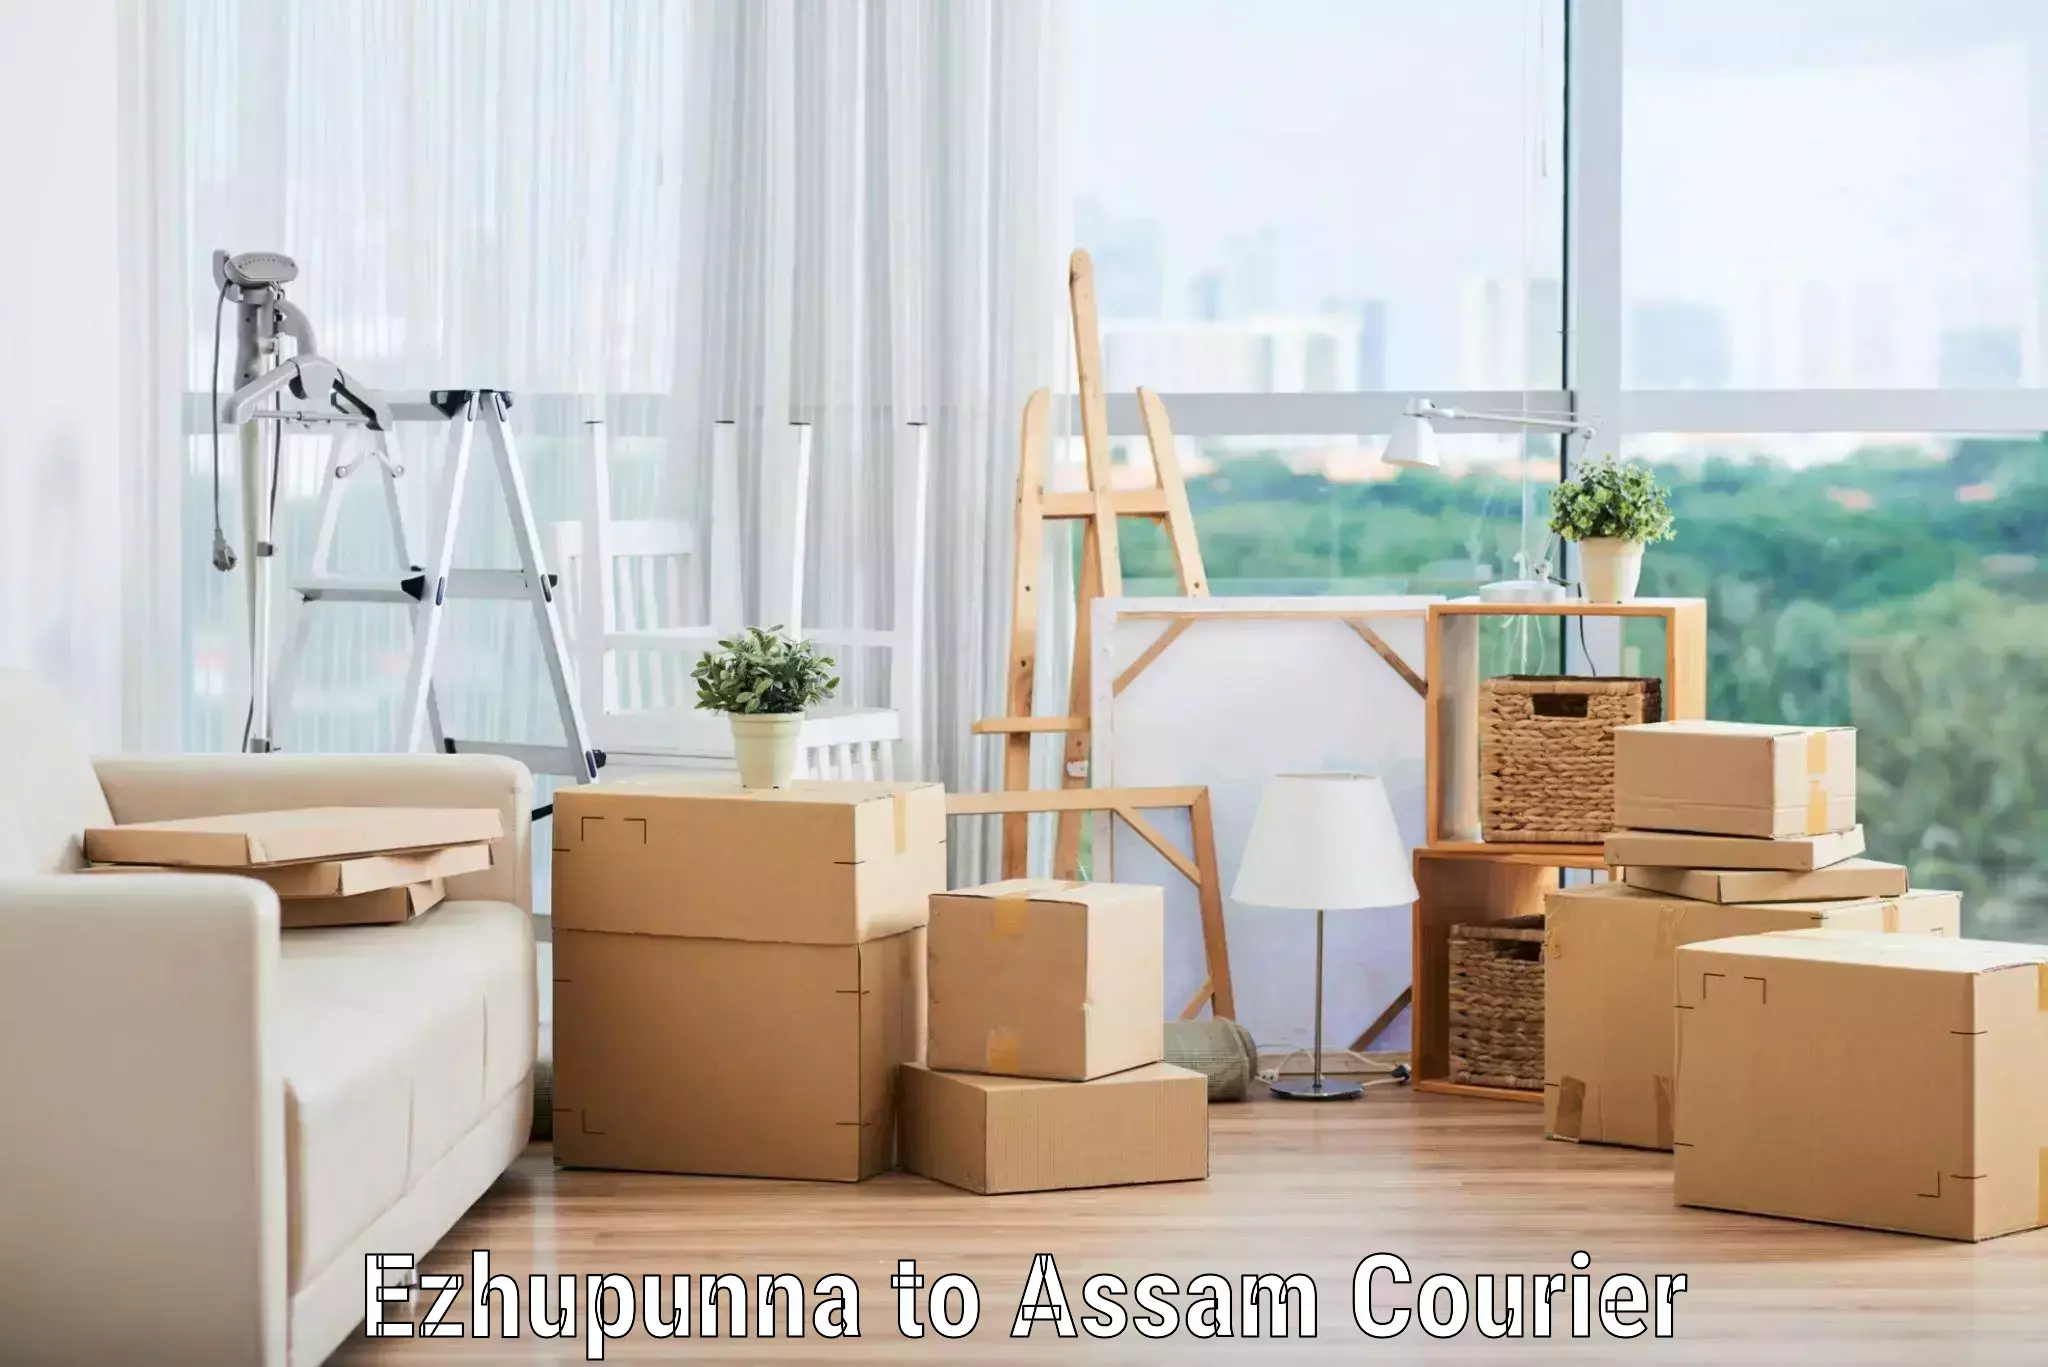 Professional home movers Ezhupunna to Lala Assam